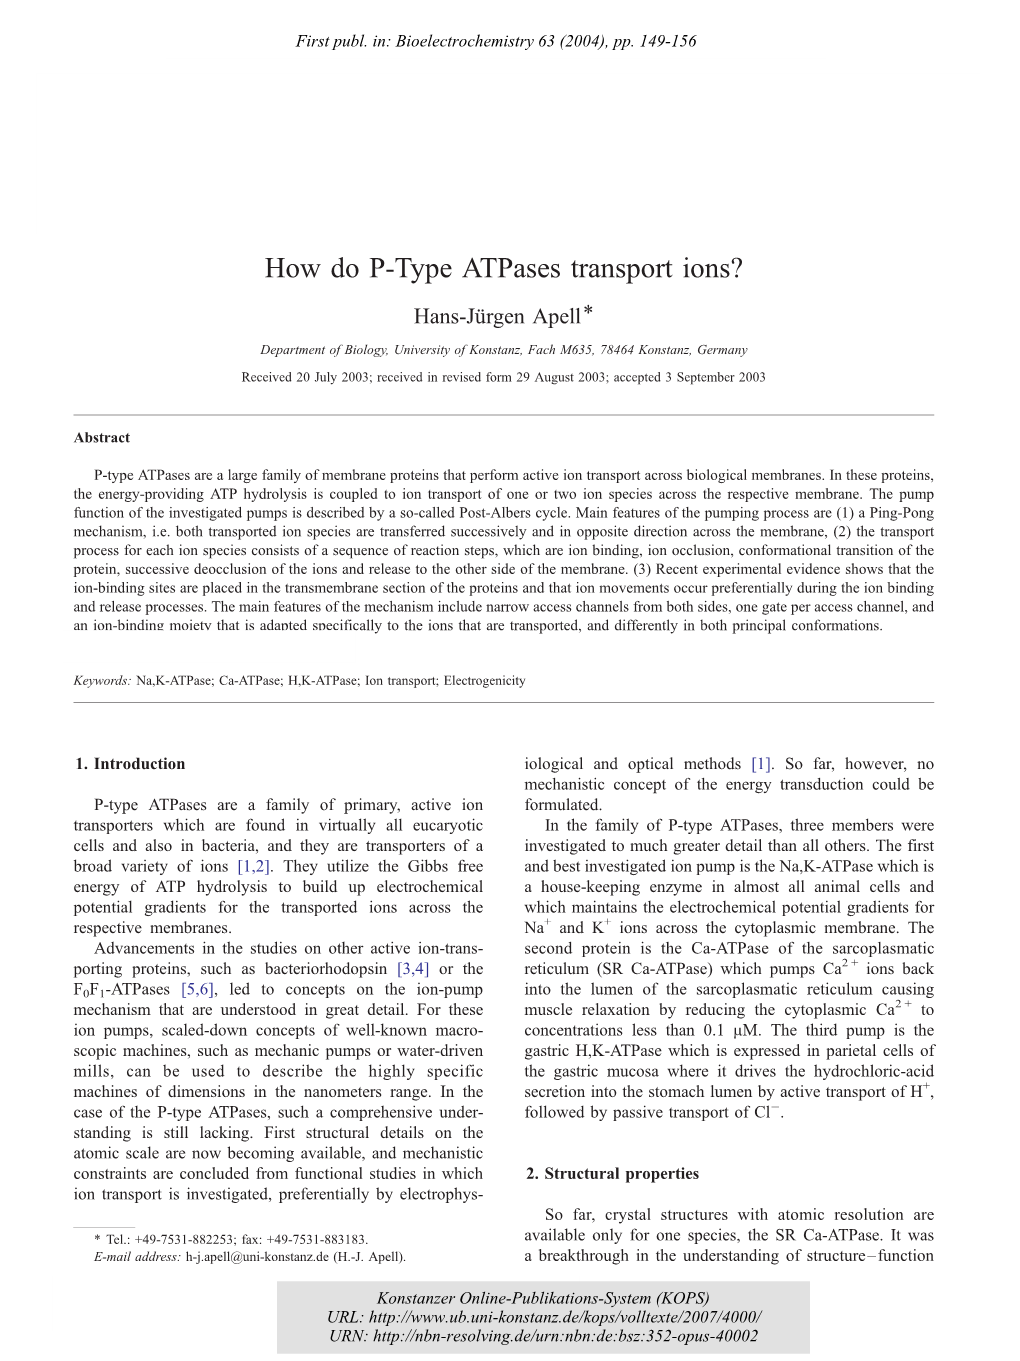 How Do P-Type Atpases Transport Ions?